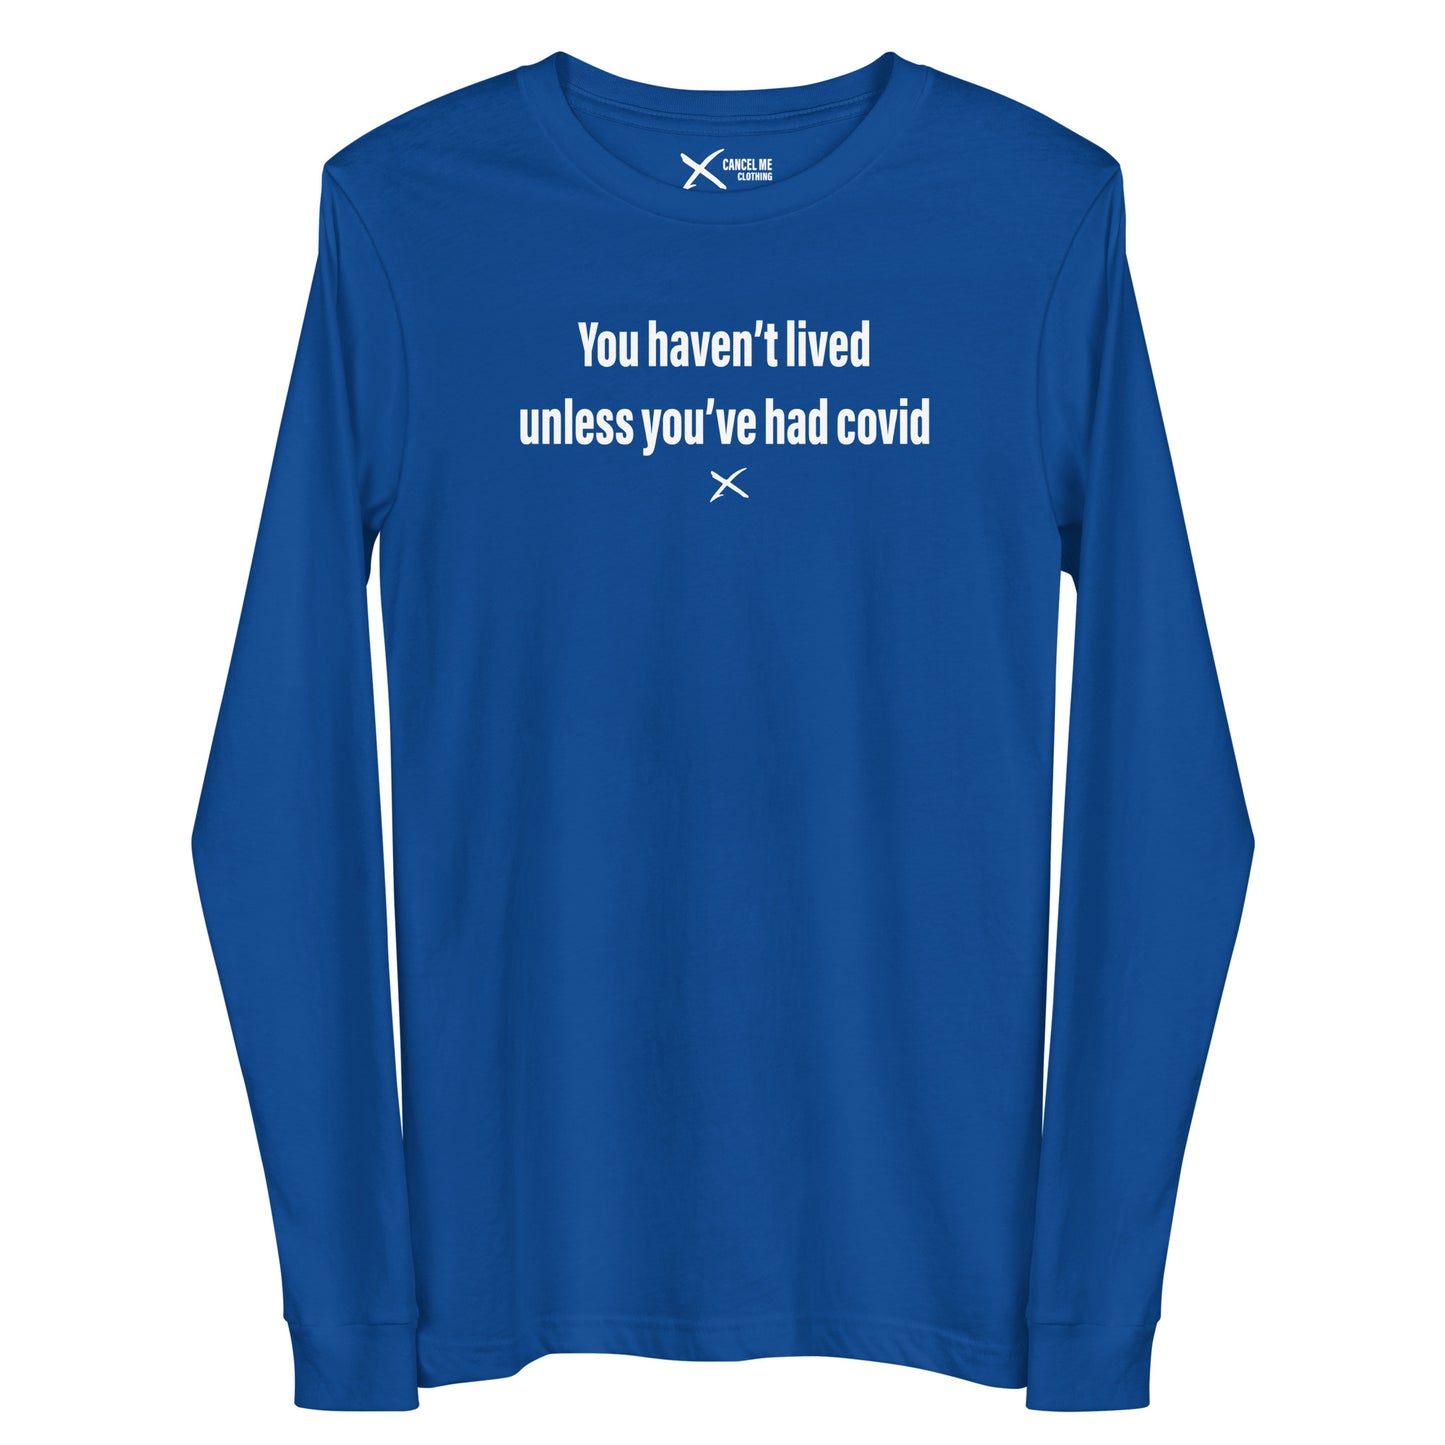 You haven't lived unless you've had covid - Longsleeve